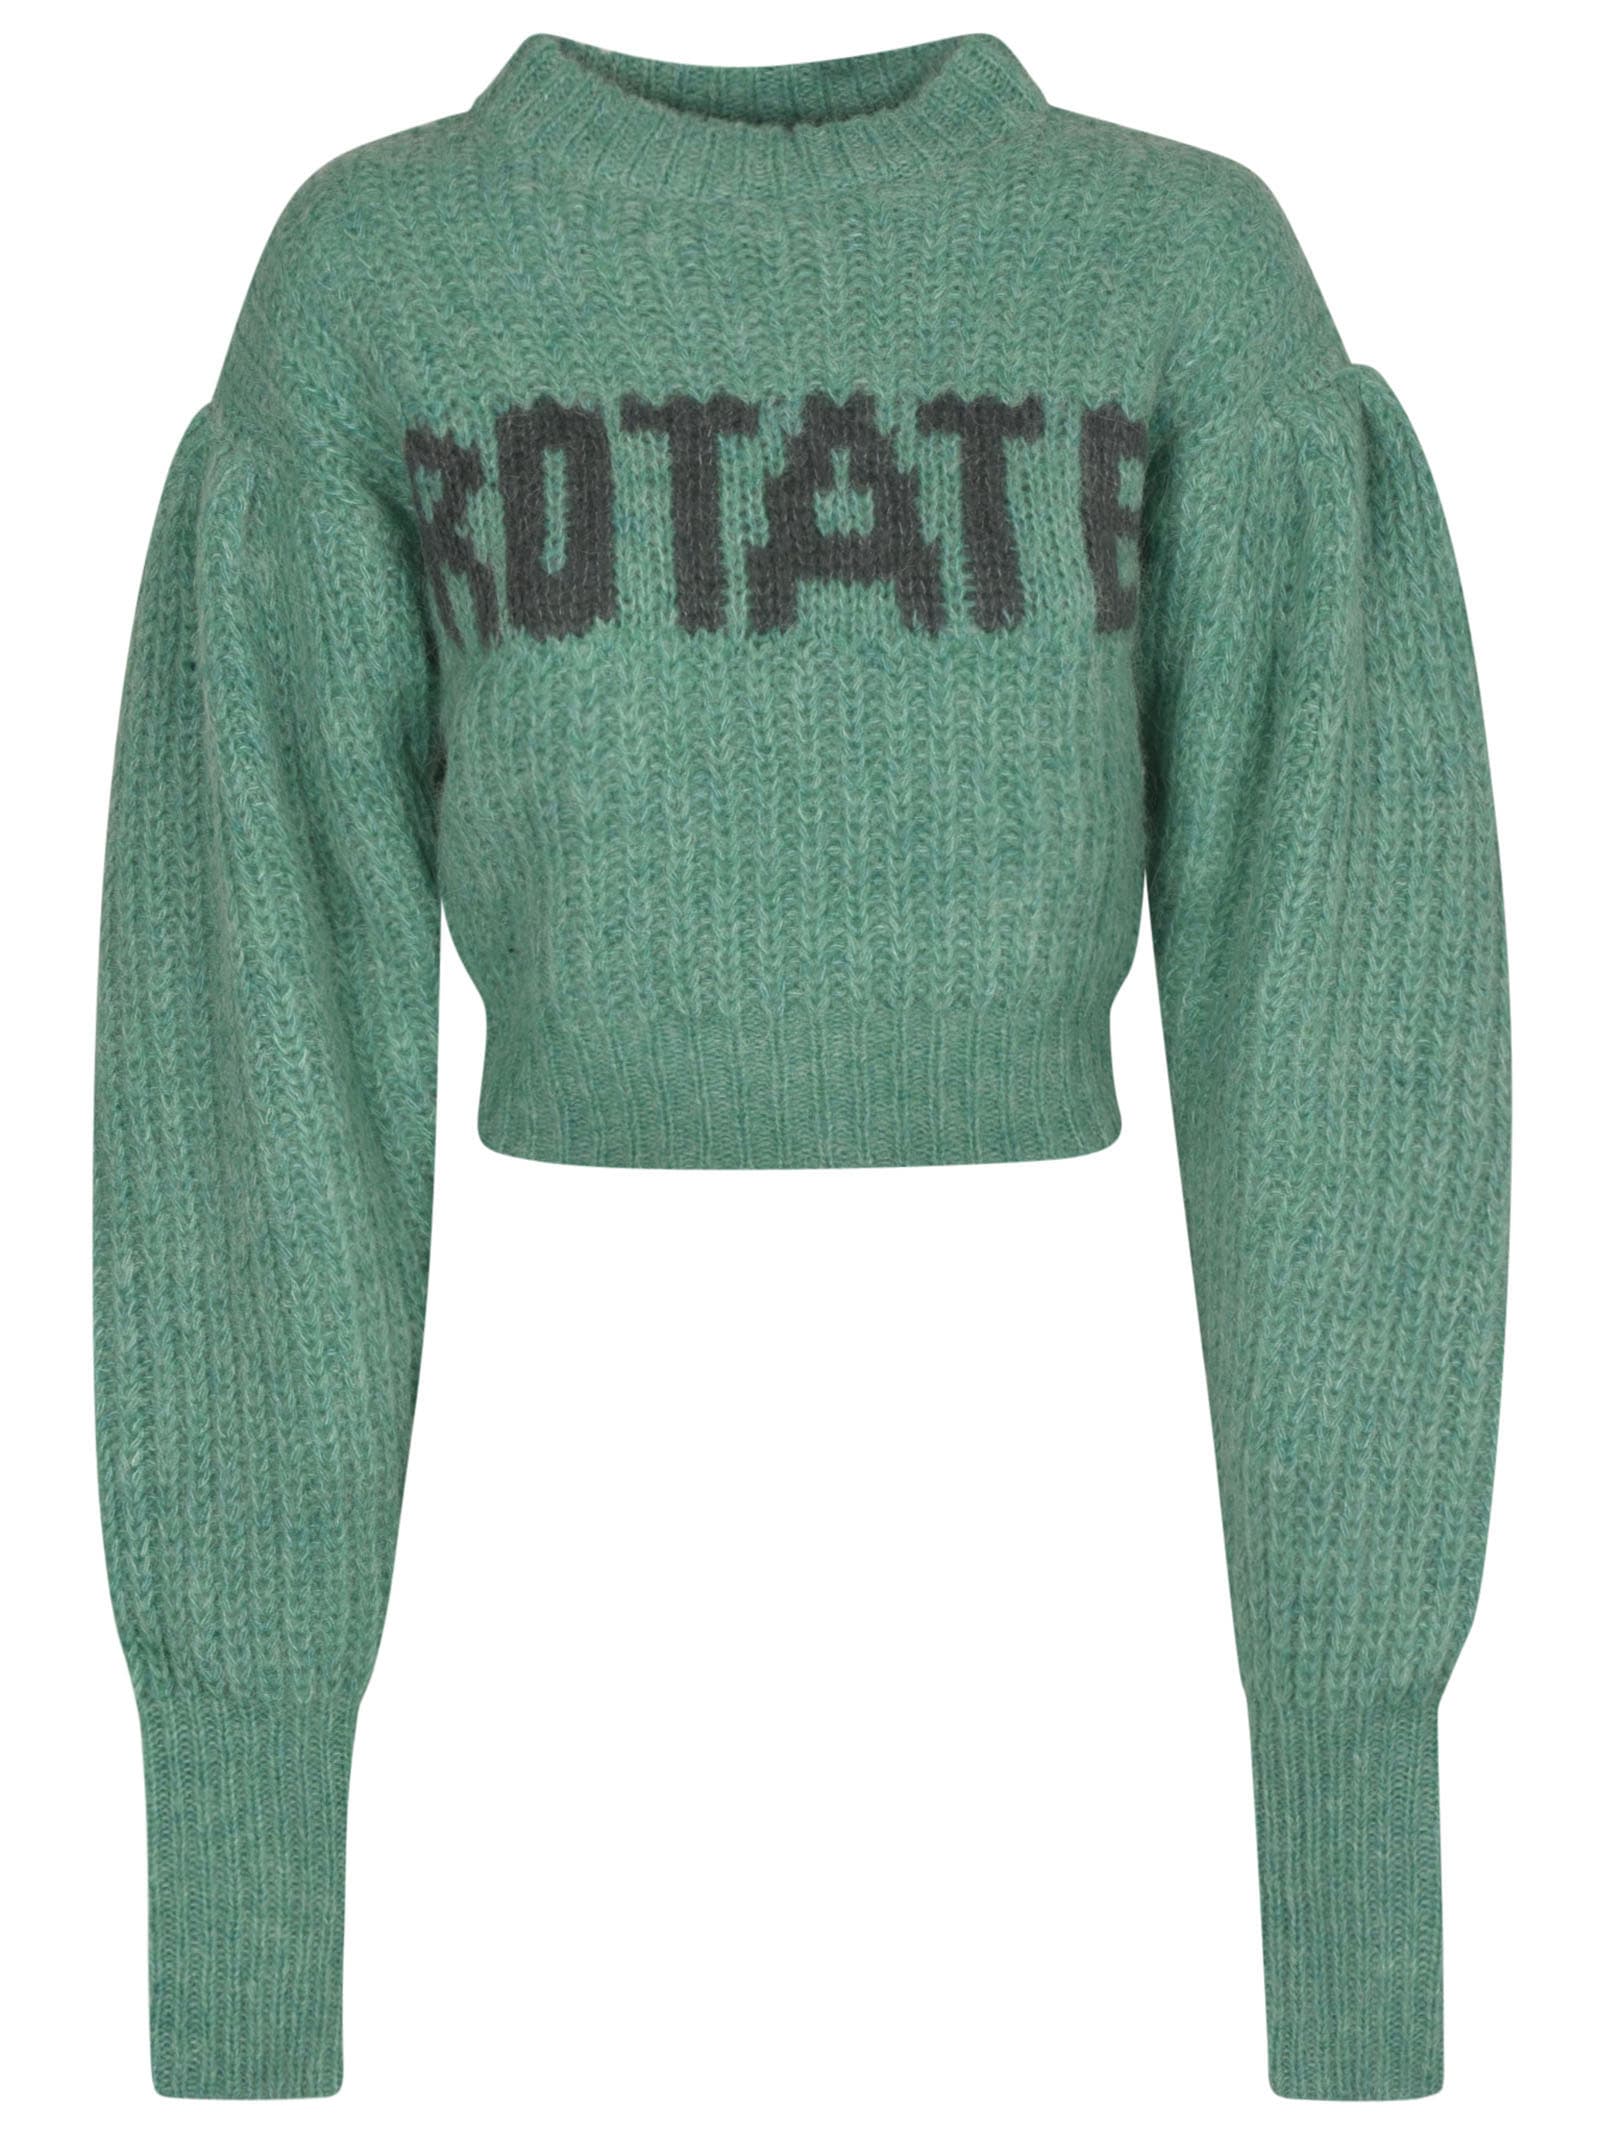 Rotate by Birger Christensen Logo Knit Cropped Sweater